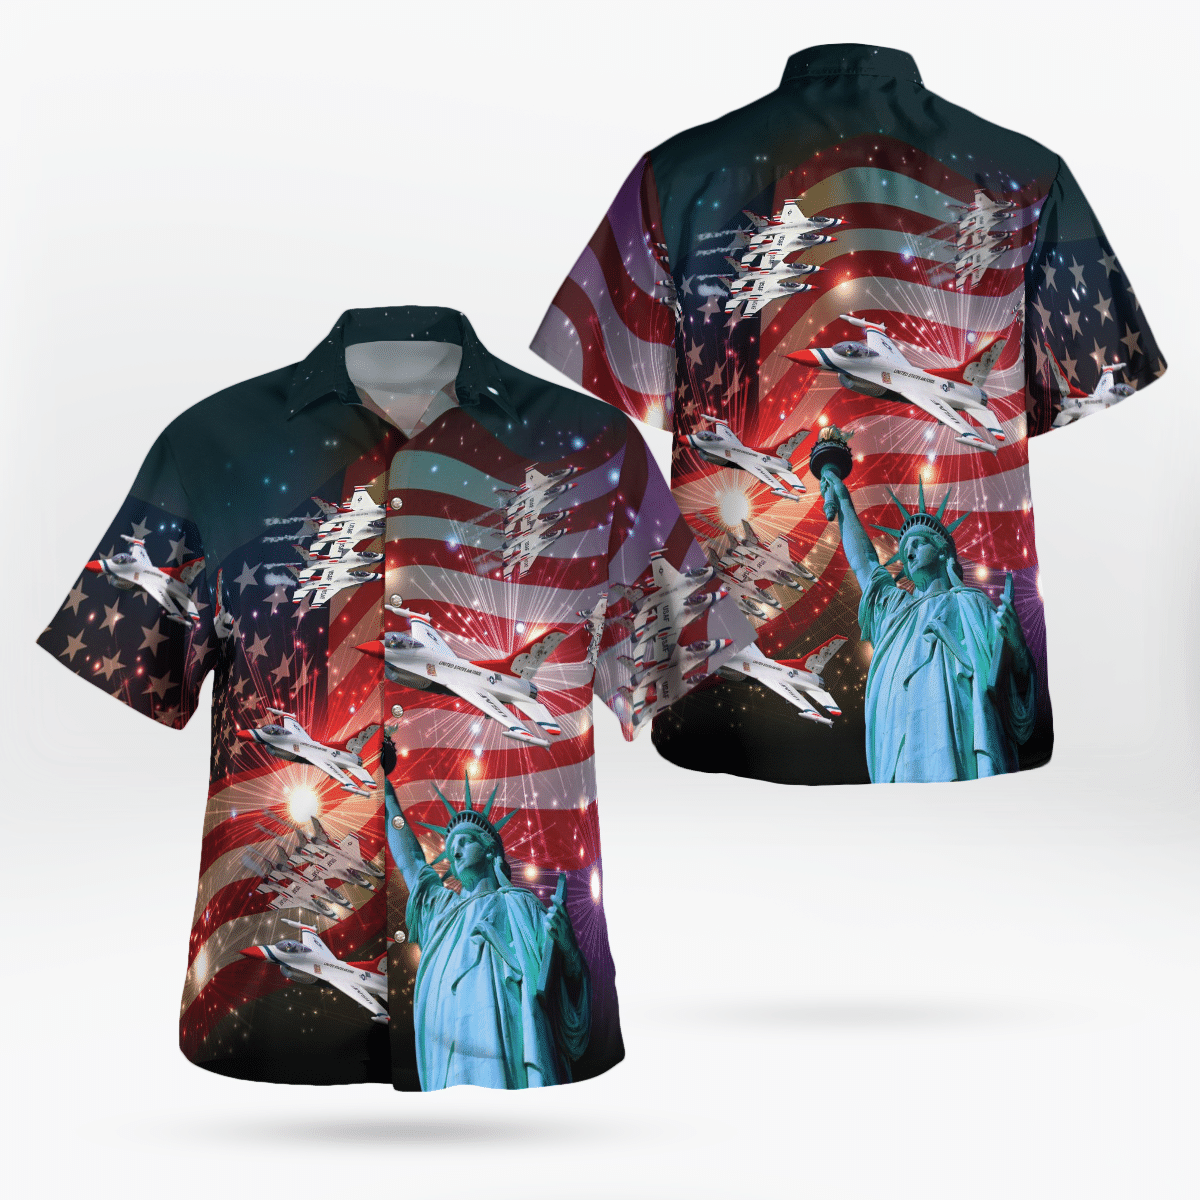 Consider getting these Hawaiian Shirt for your friends 407